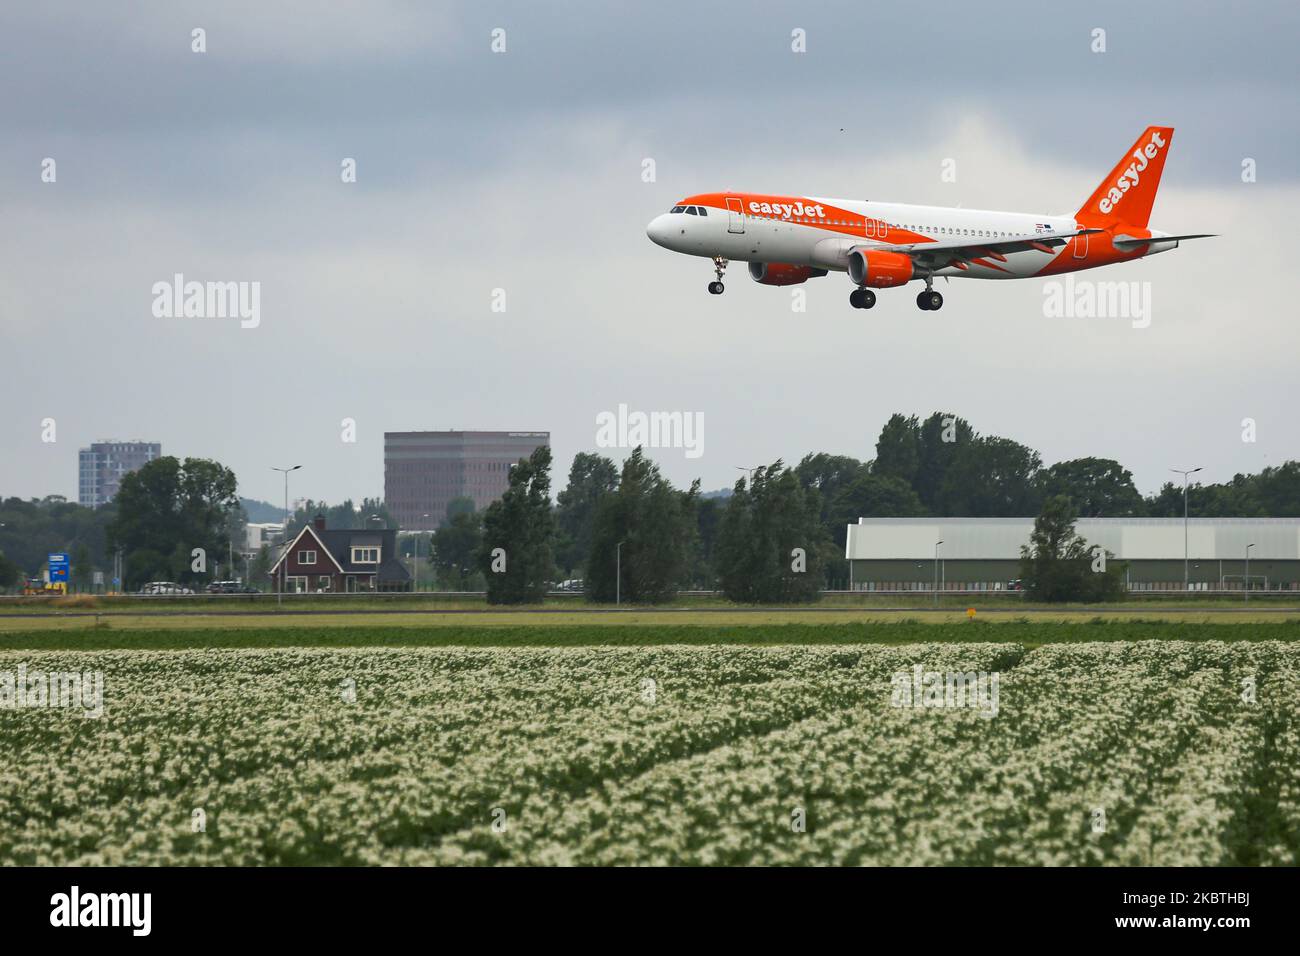 EasyJet Europe low cost airline Airbus A320 aircraft as seen on final approach on final flying, touch down, landing and breaking phase at Amsterdam Schiphol AMS EHAM International Airport in the Netherlands on July 2, 2020. The British budget carrier with headquarters in London, U2 Easy Jet is flying an all airbus fleet. The specific narrow body airplane has the registration OE-INP and 2x CFMI engines and is the branch part of EasyJet Europe Airline BmbH fleet EC EJU ALPINE based in Vienna. (Photo by Nicolas Economou/NurPhoto) Stock Photo